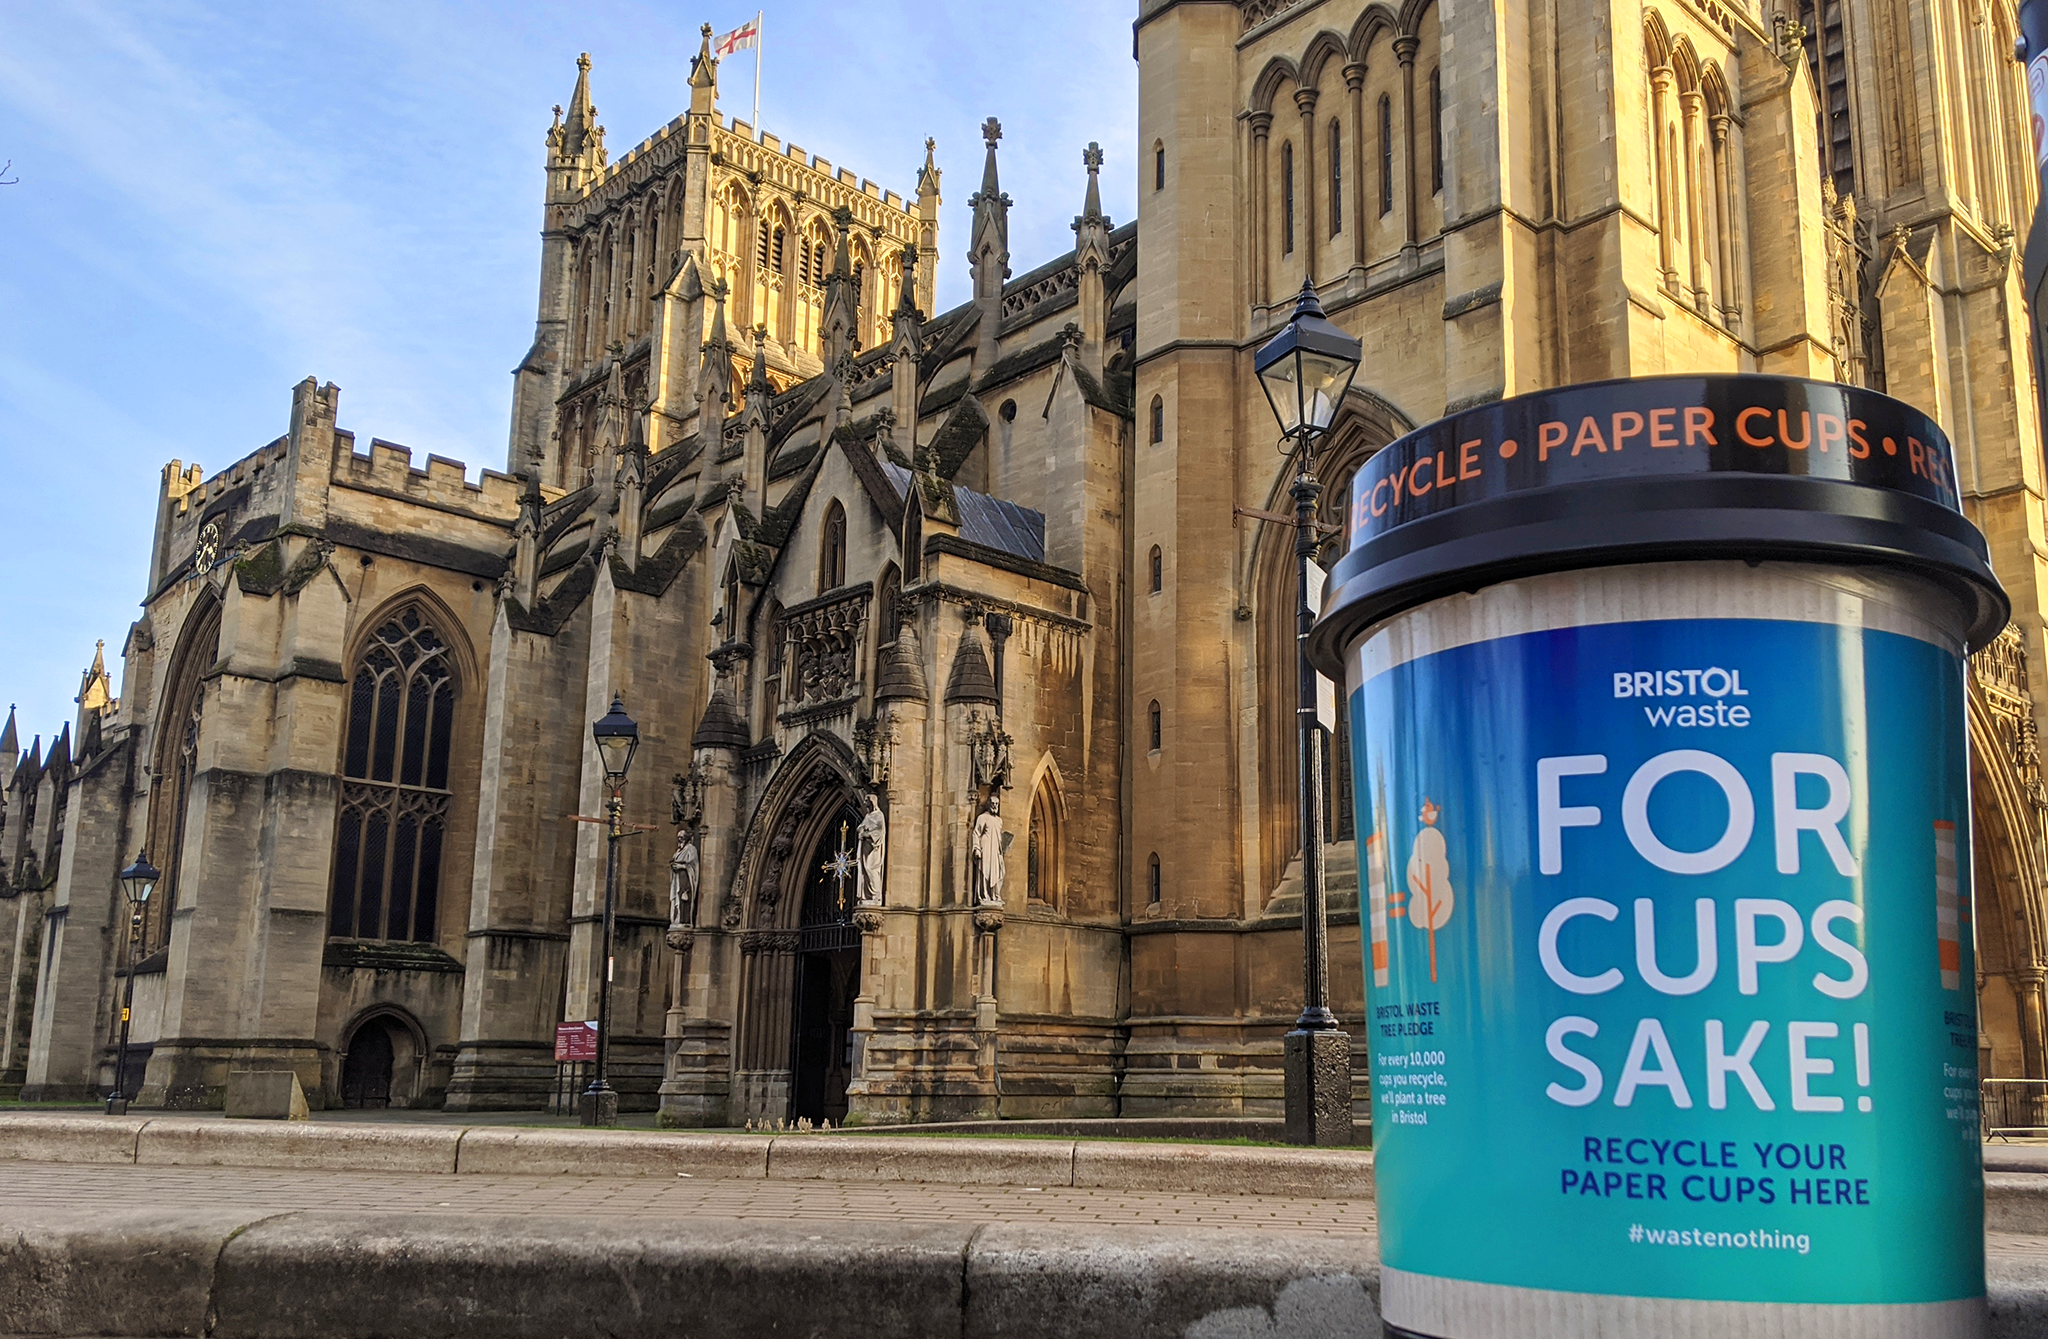 A Bristol Waste coffee cup bin in front of Bristol Cathedral